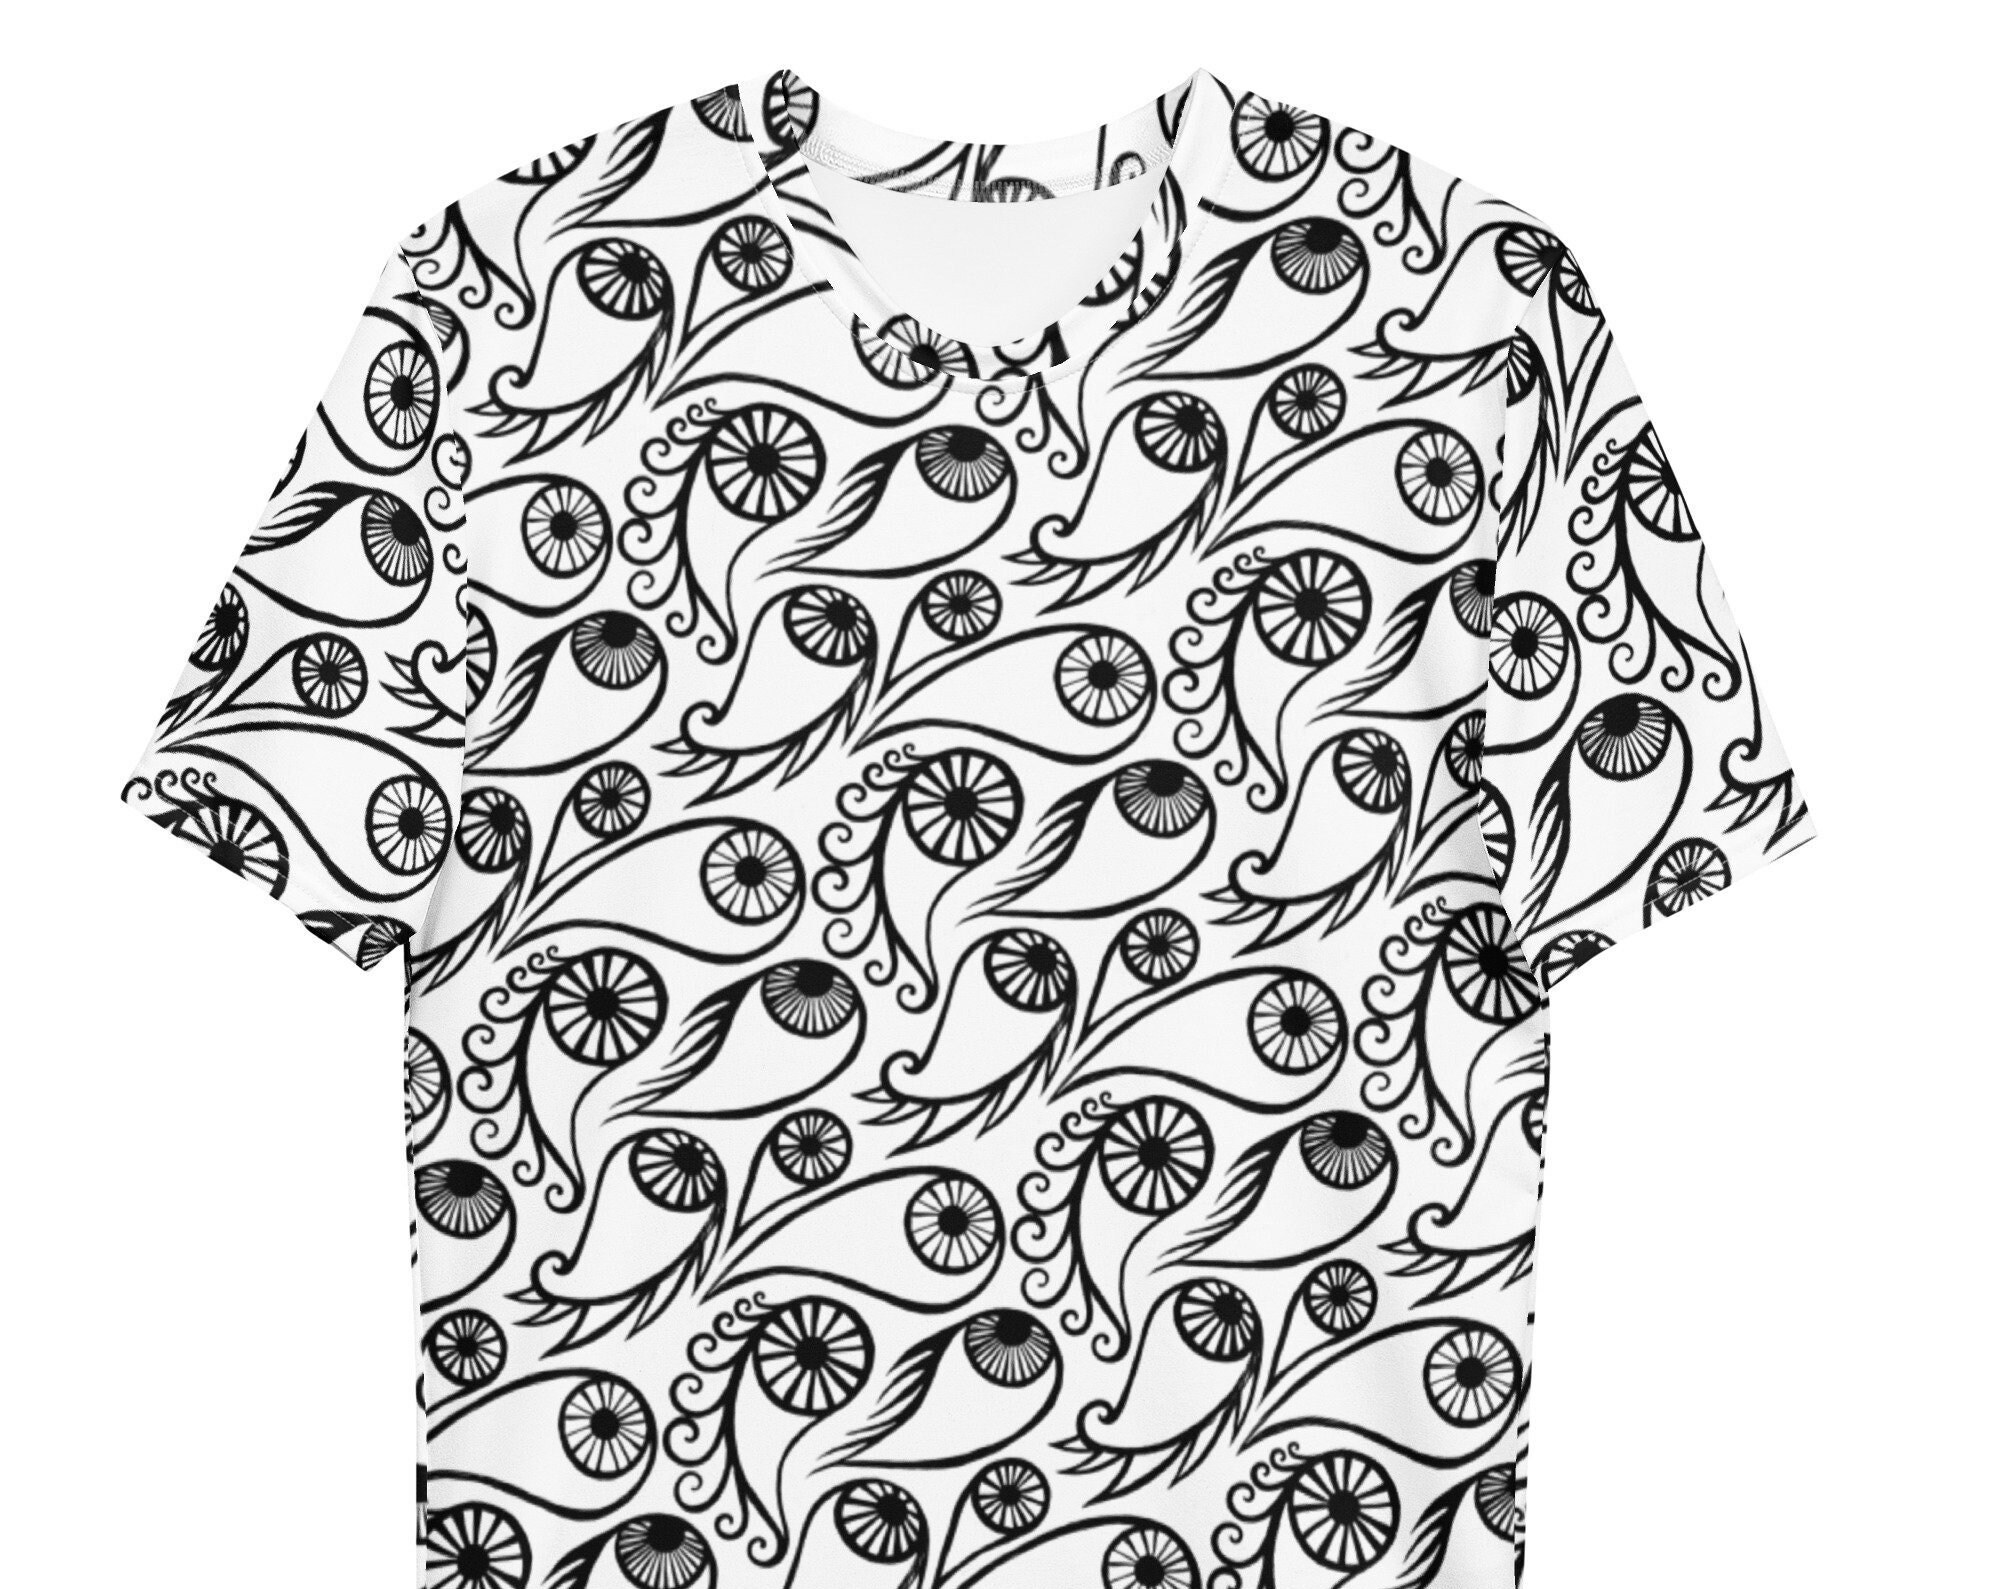 Discover 3D Shirt - All Seeing Eyes